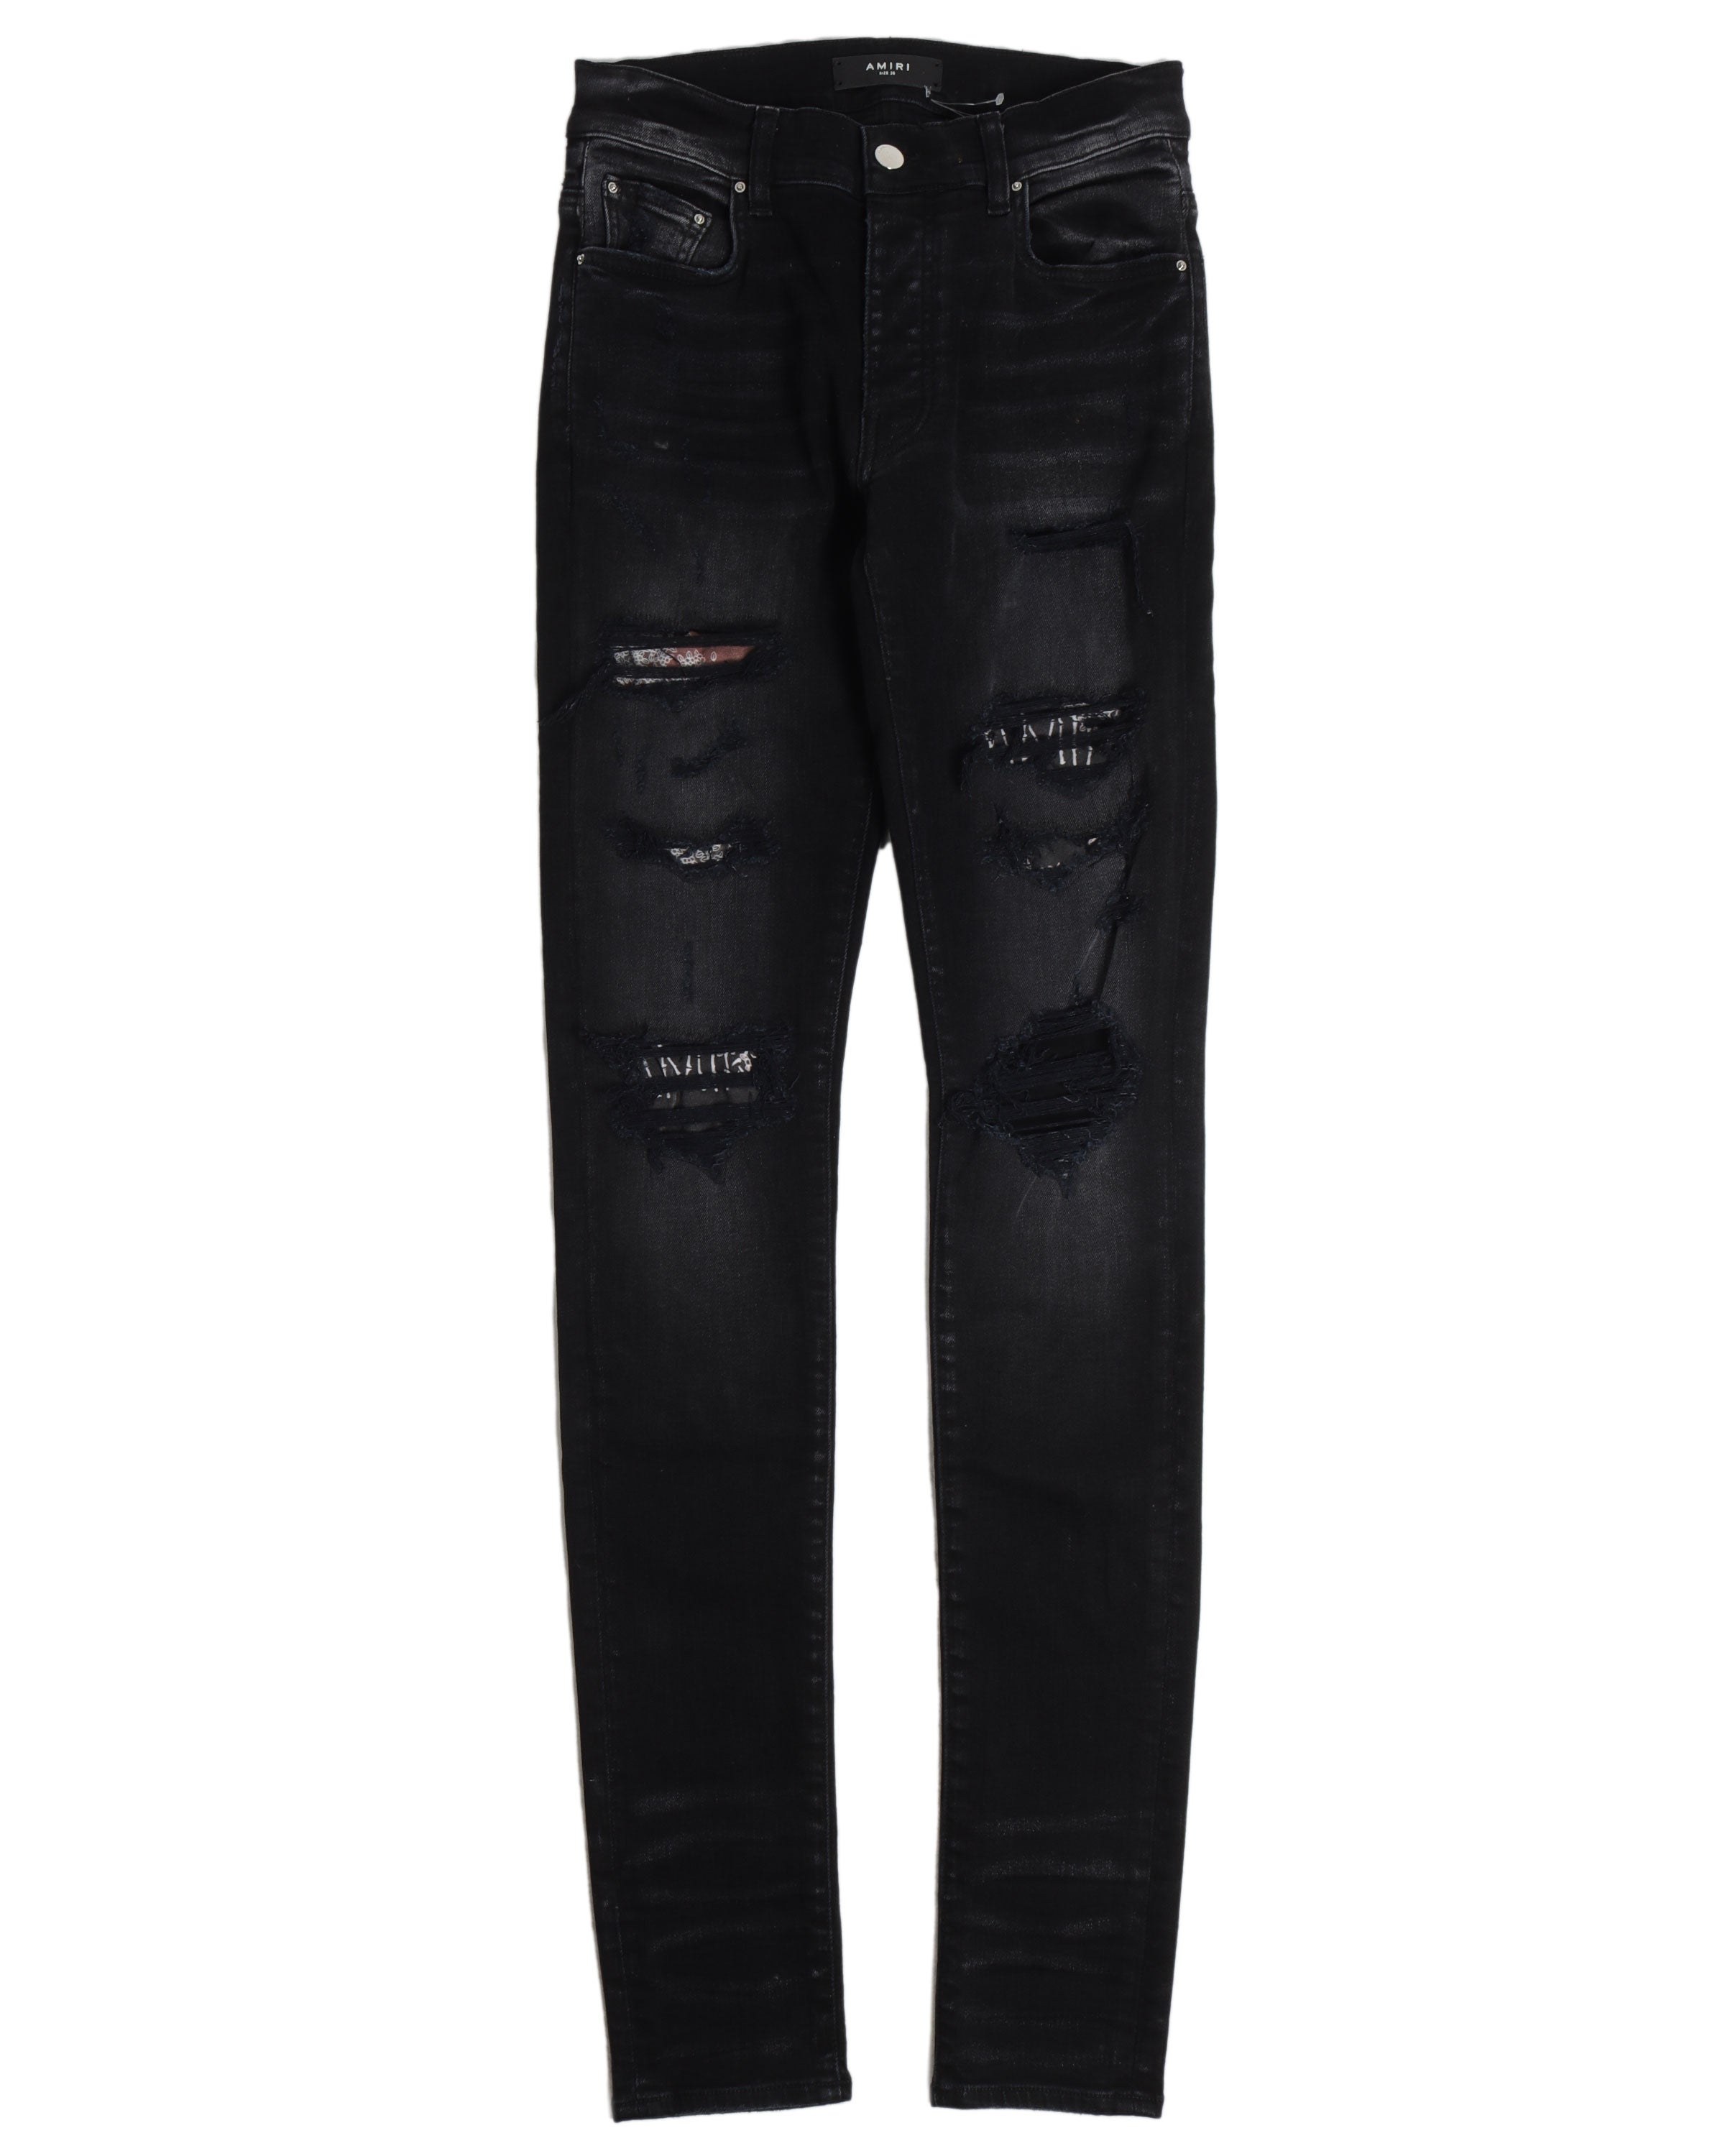 Hibiscus Art Patch Jeans